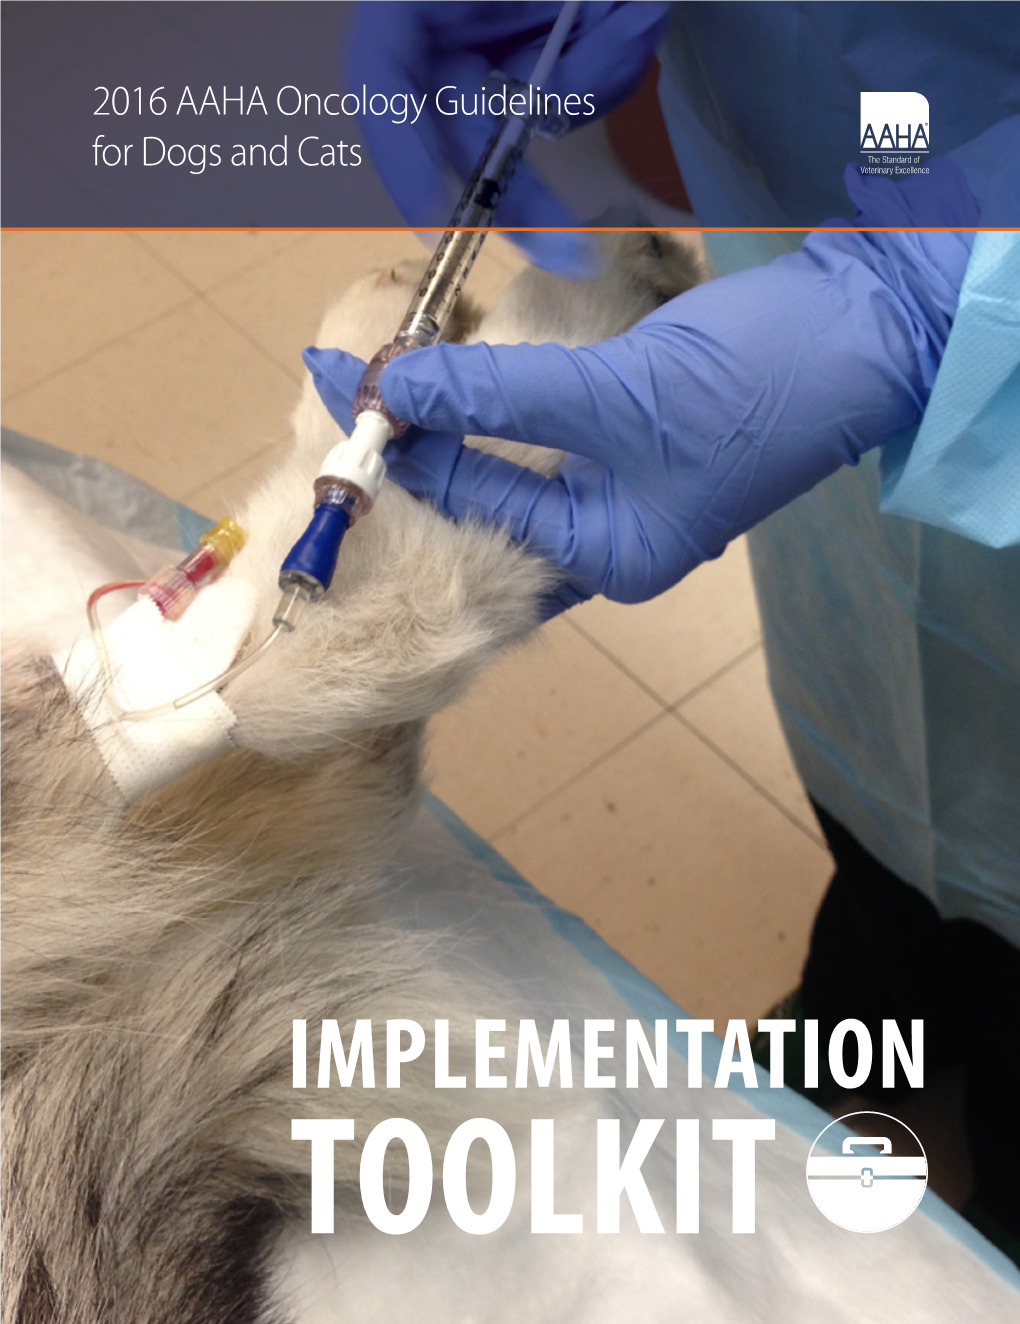 2016 AAHA Oncology Guidelines for Dogs and Cats